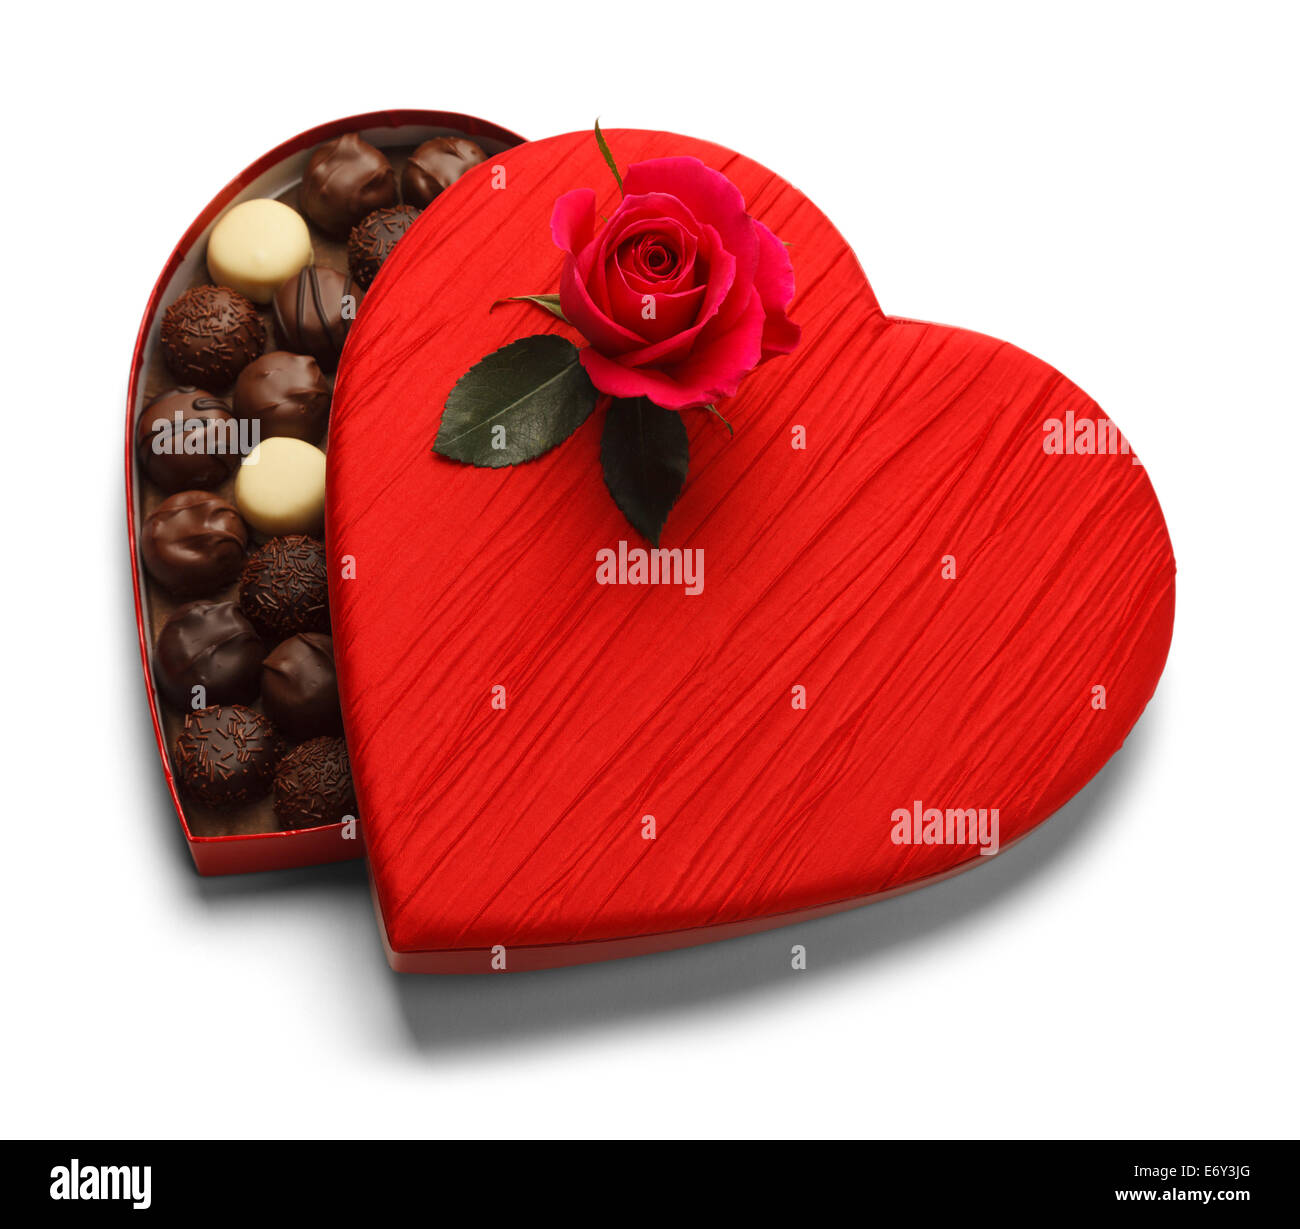 Red Heart Box of Chocolates with Rose Isolated on White Background. Stock Photo